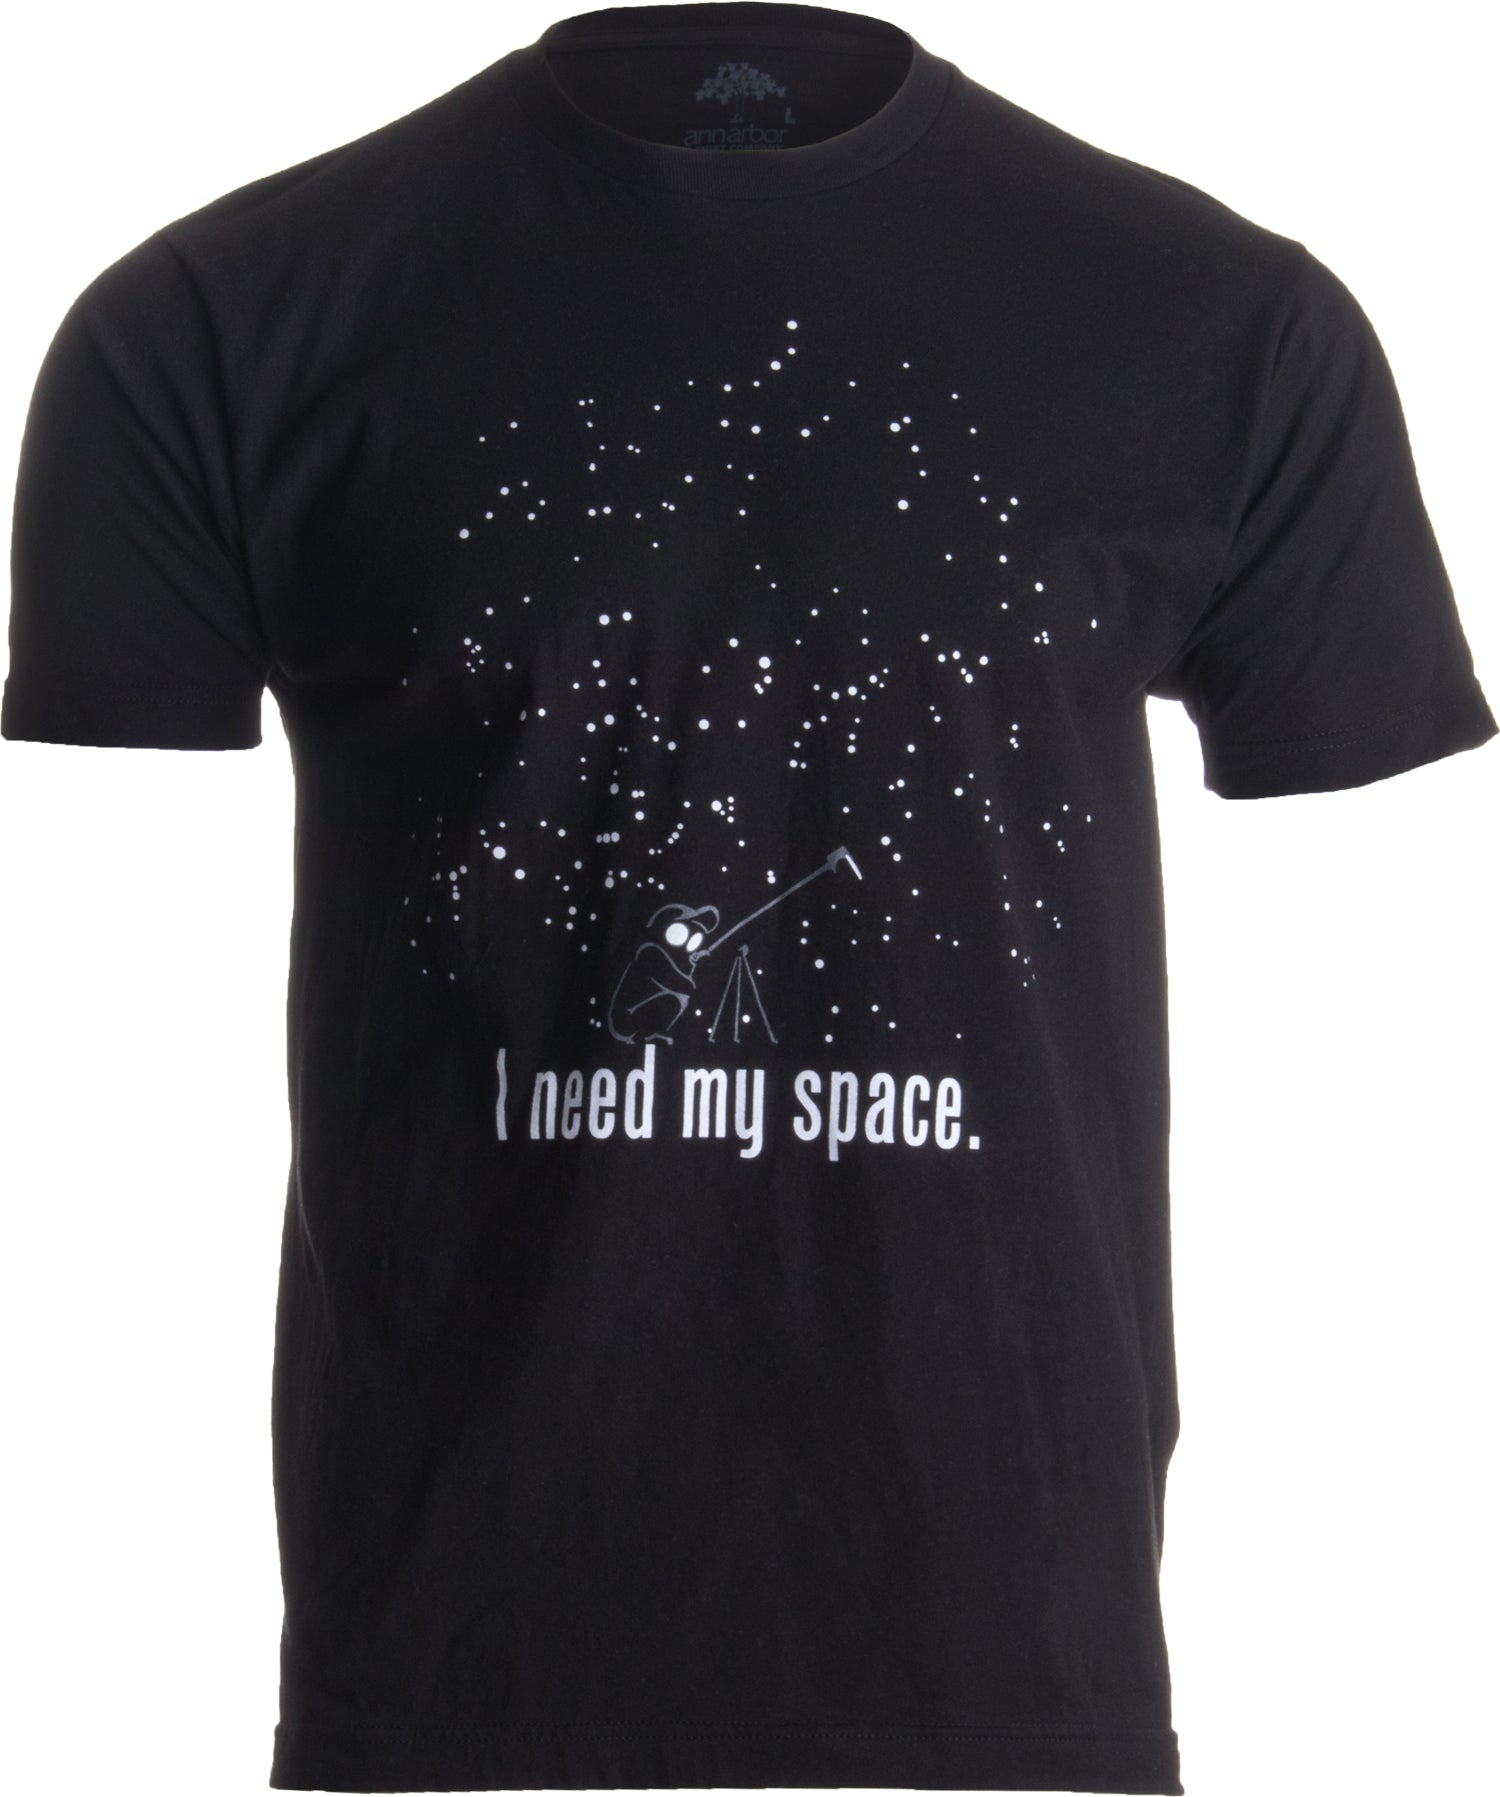 farve Uanset hvilken heldig I Need My Space | Funny Astronomy, Space Humor Astronomer NASA Unisex T- shirt-Adult,S – Ann Arbor T-shirt Company